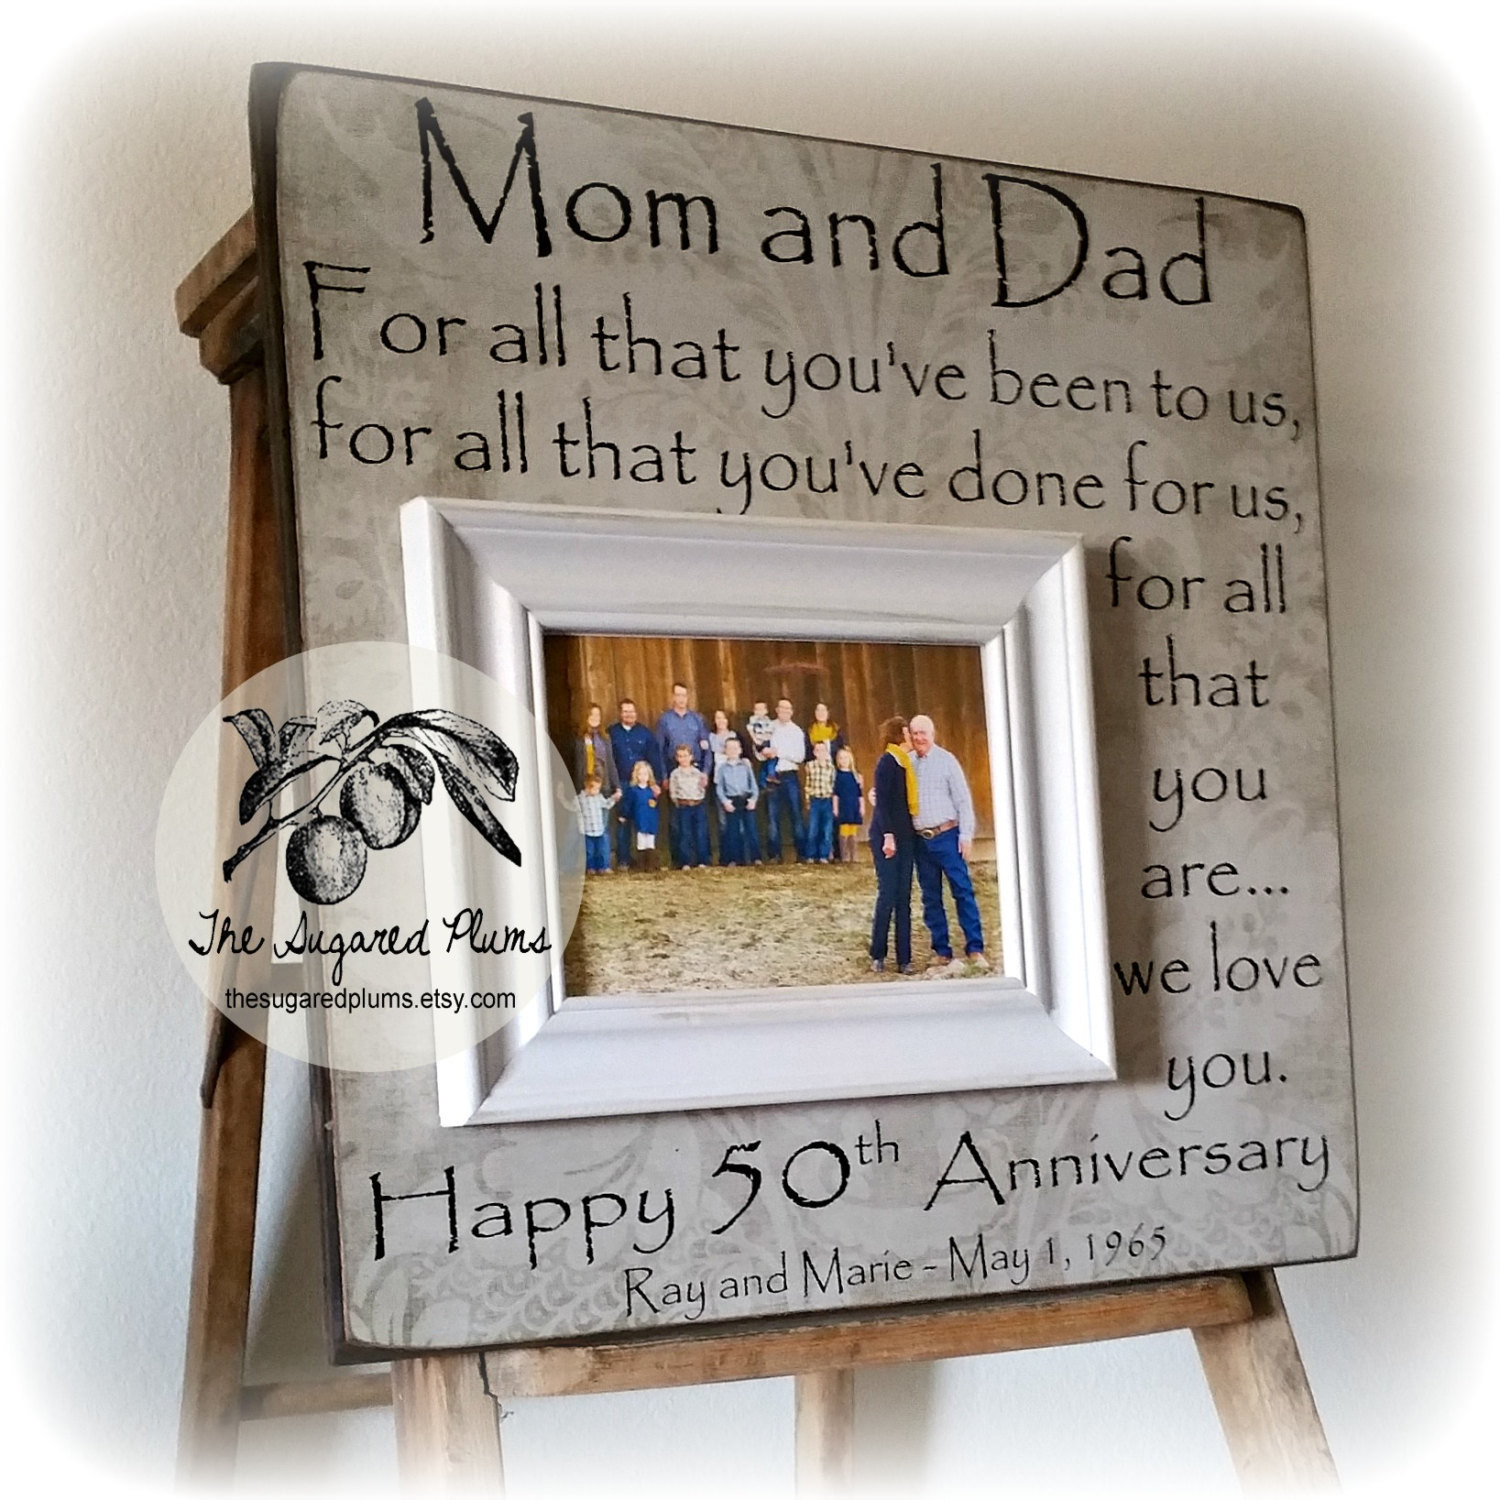 Golden Wedding Anniversary Gift Ideas For Parents
 50th Anniversary Gifts Parents Anniversary Gift For All That